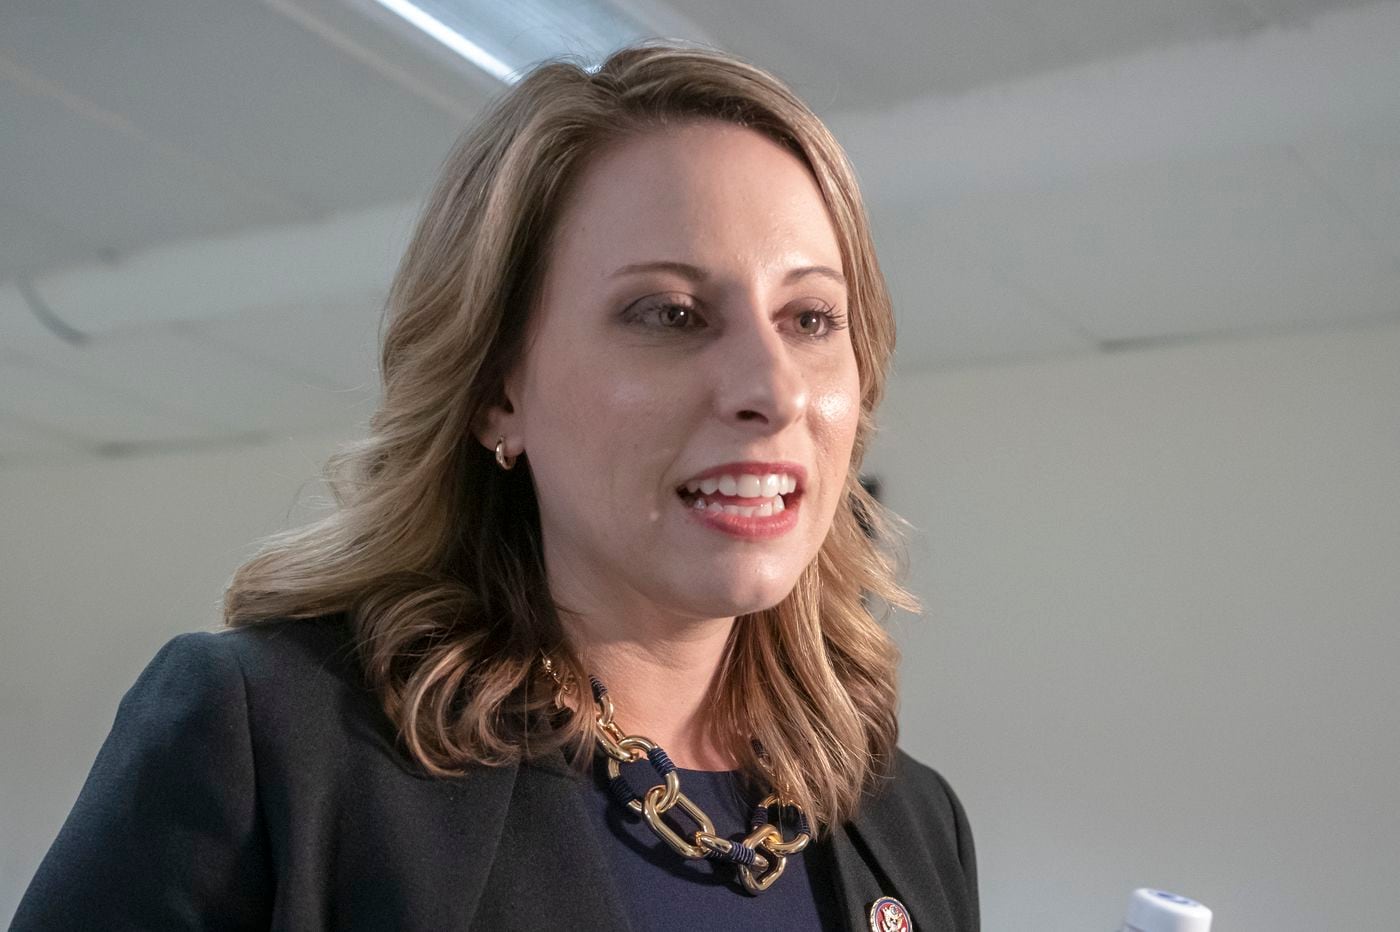 Revnge Porn - Rep. Katie Hill resigned because she behaved unethically ...